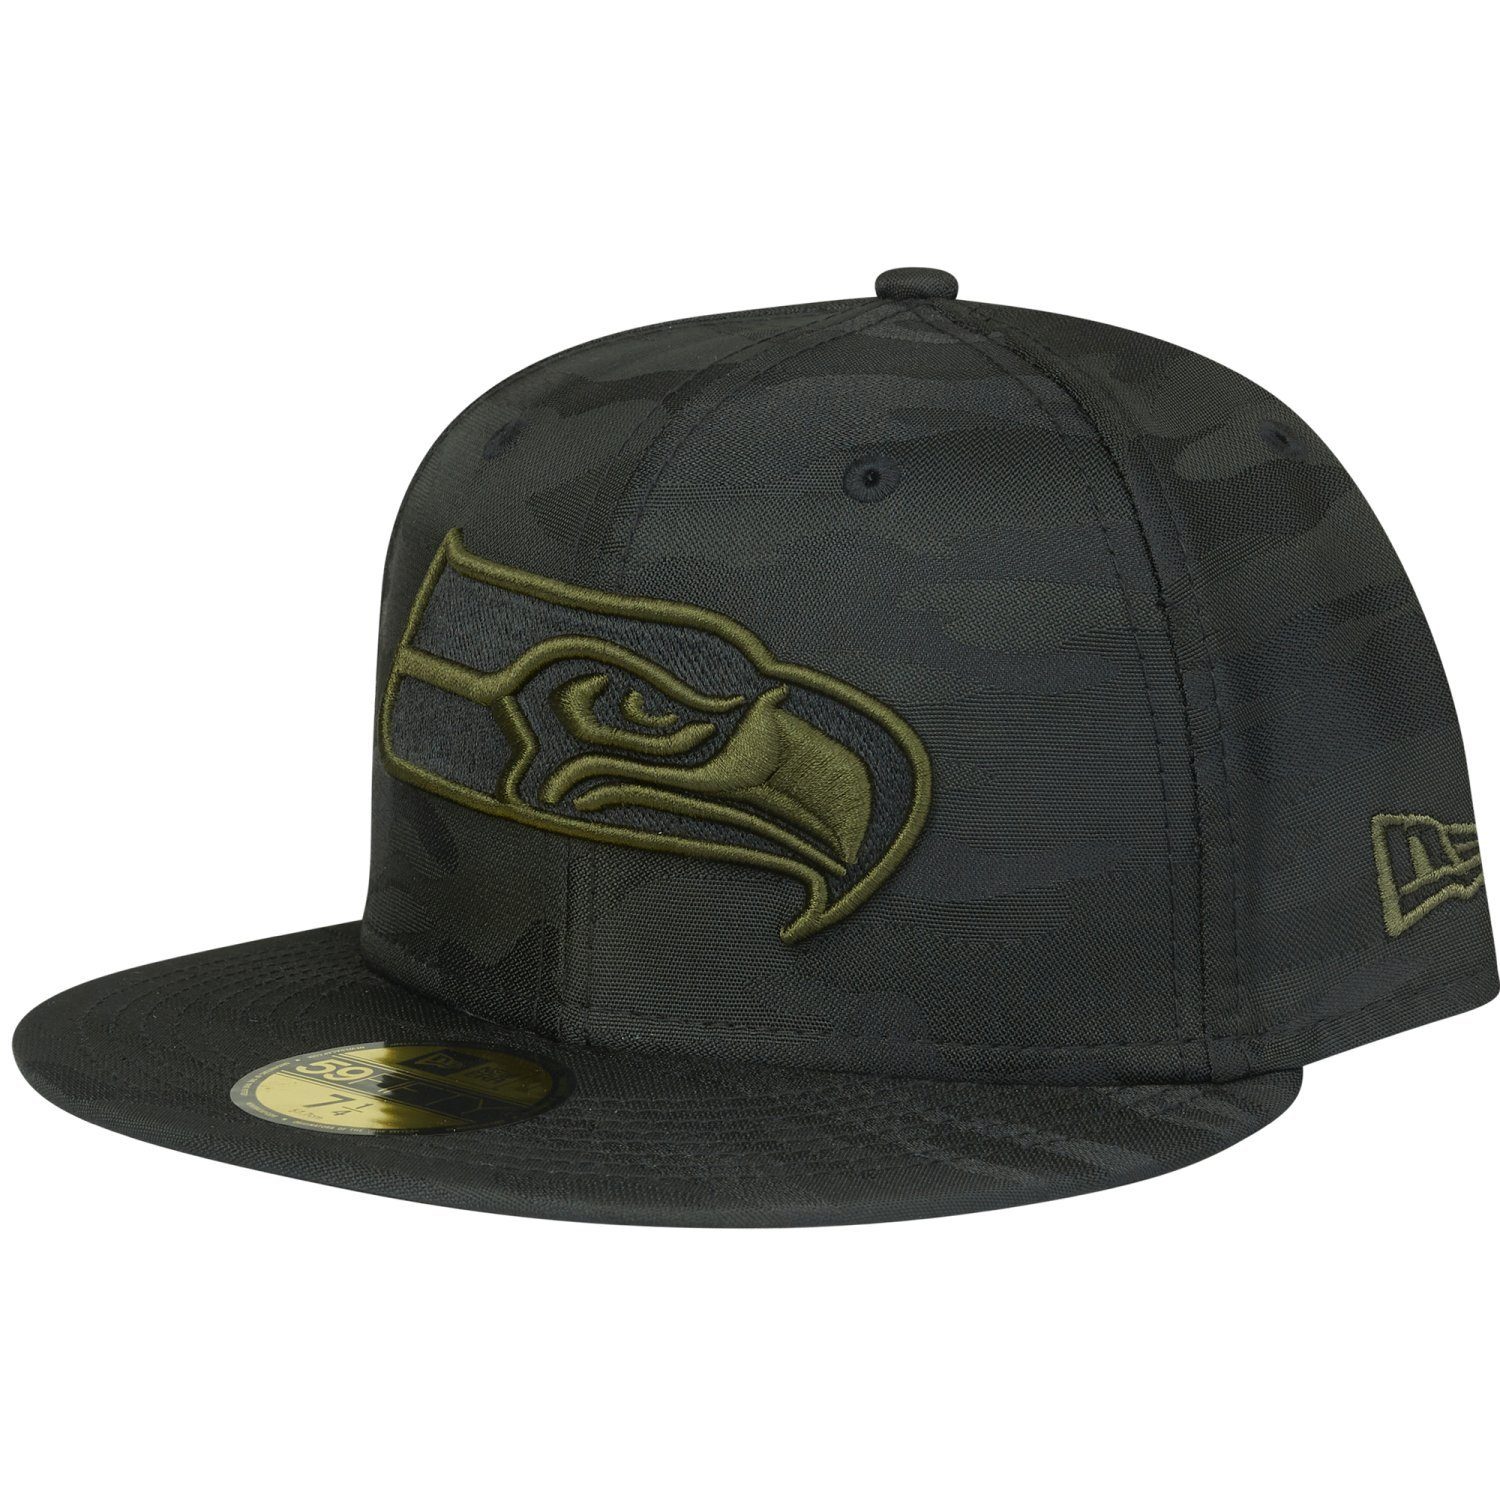 New Era Fitted Cap 59Fifty NFL Seahawks TEAMS Seattle alpine